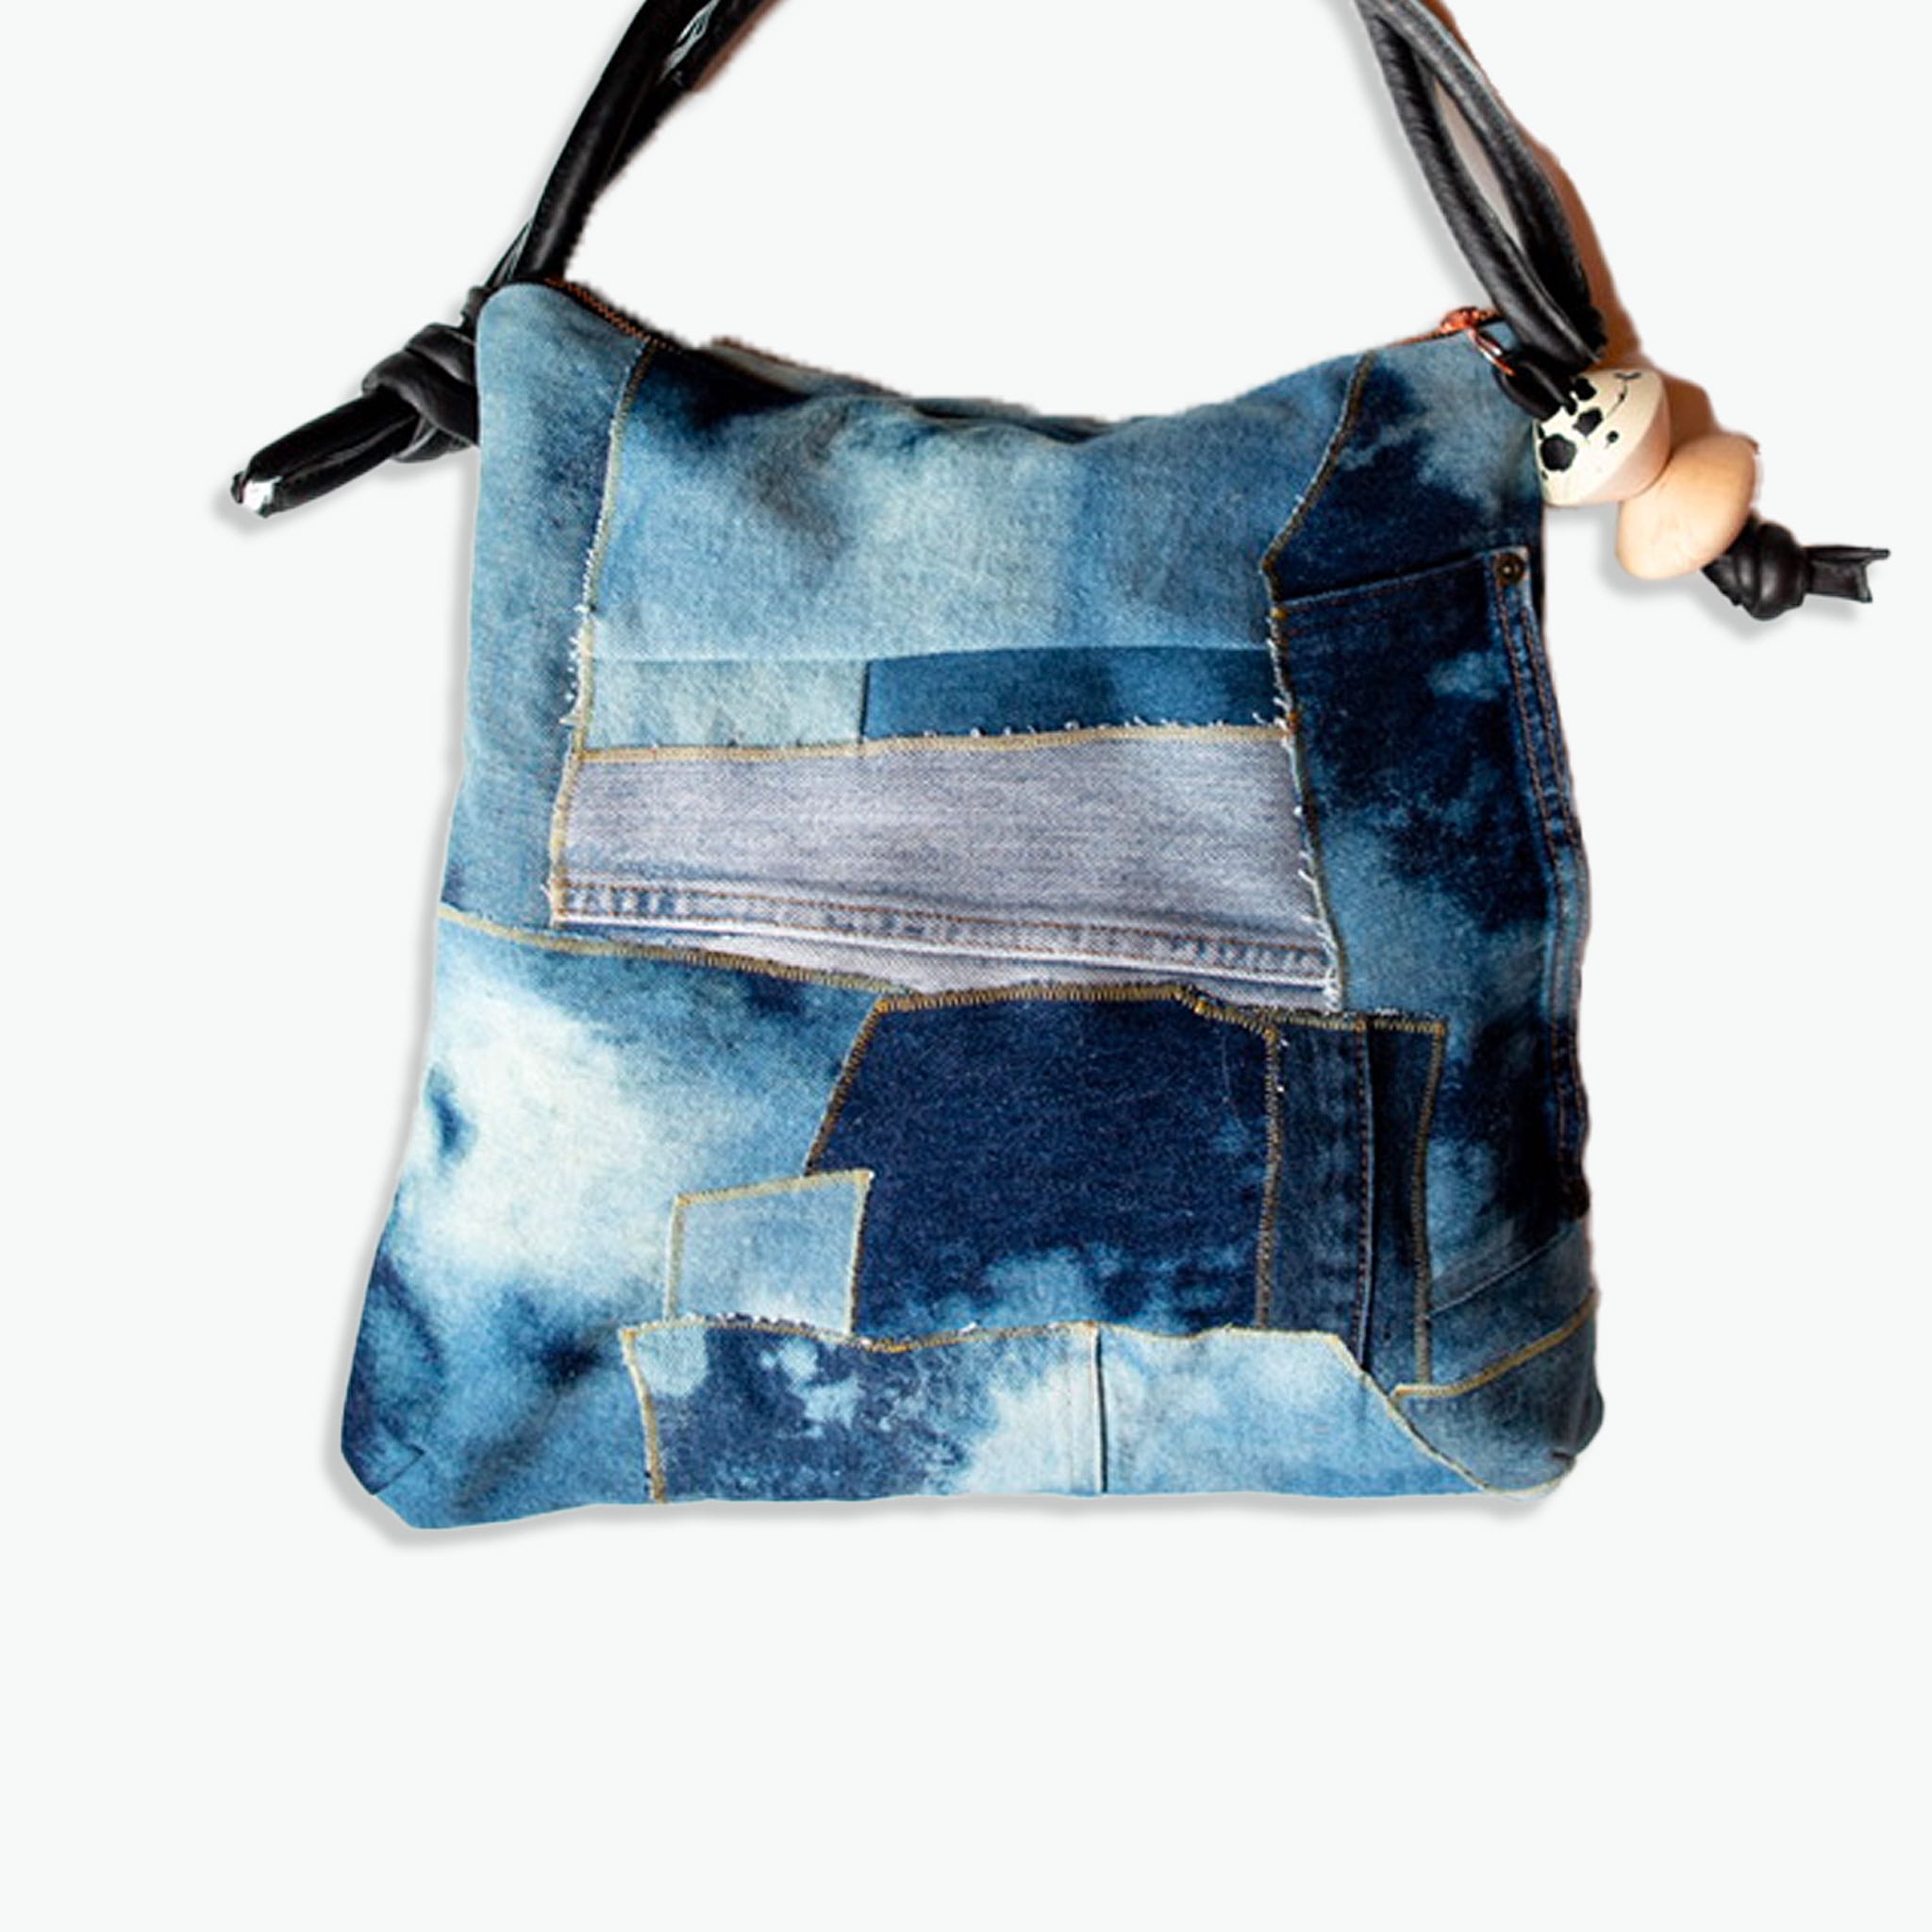 Blue handmade and recycled shoulder bag